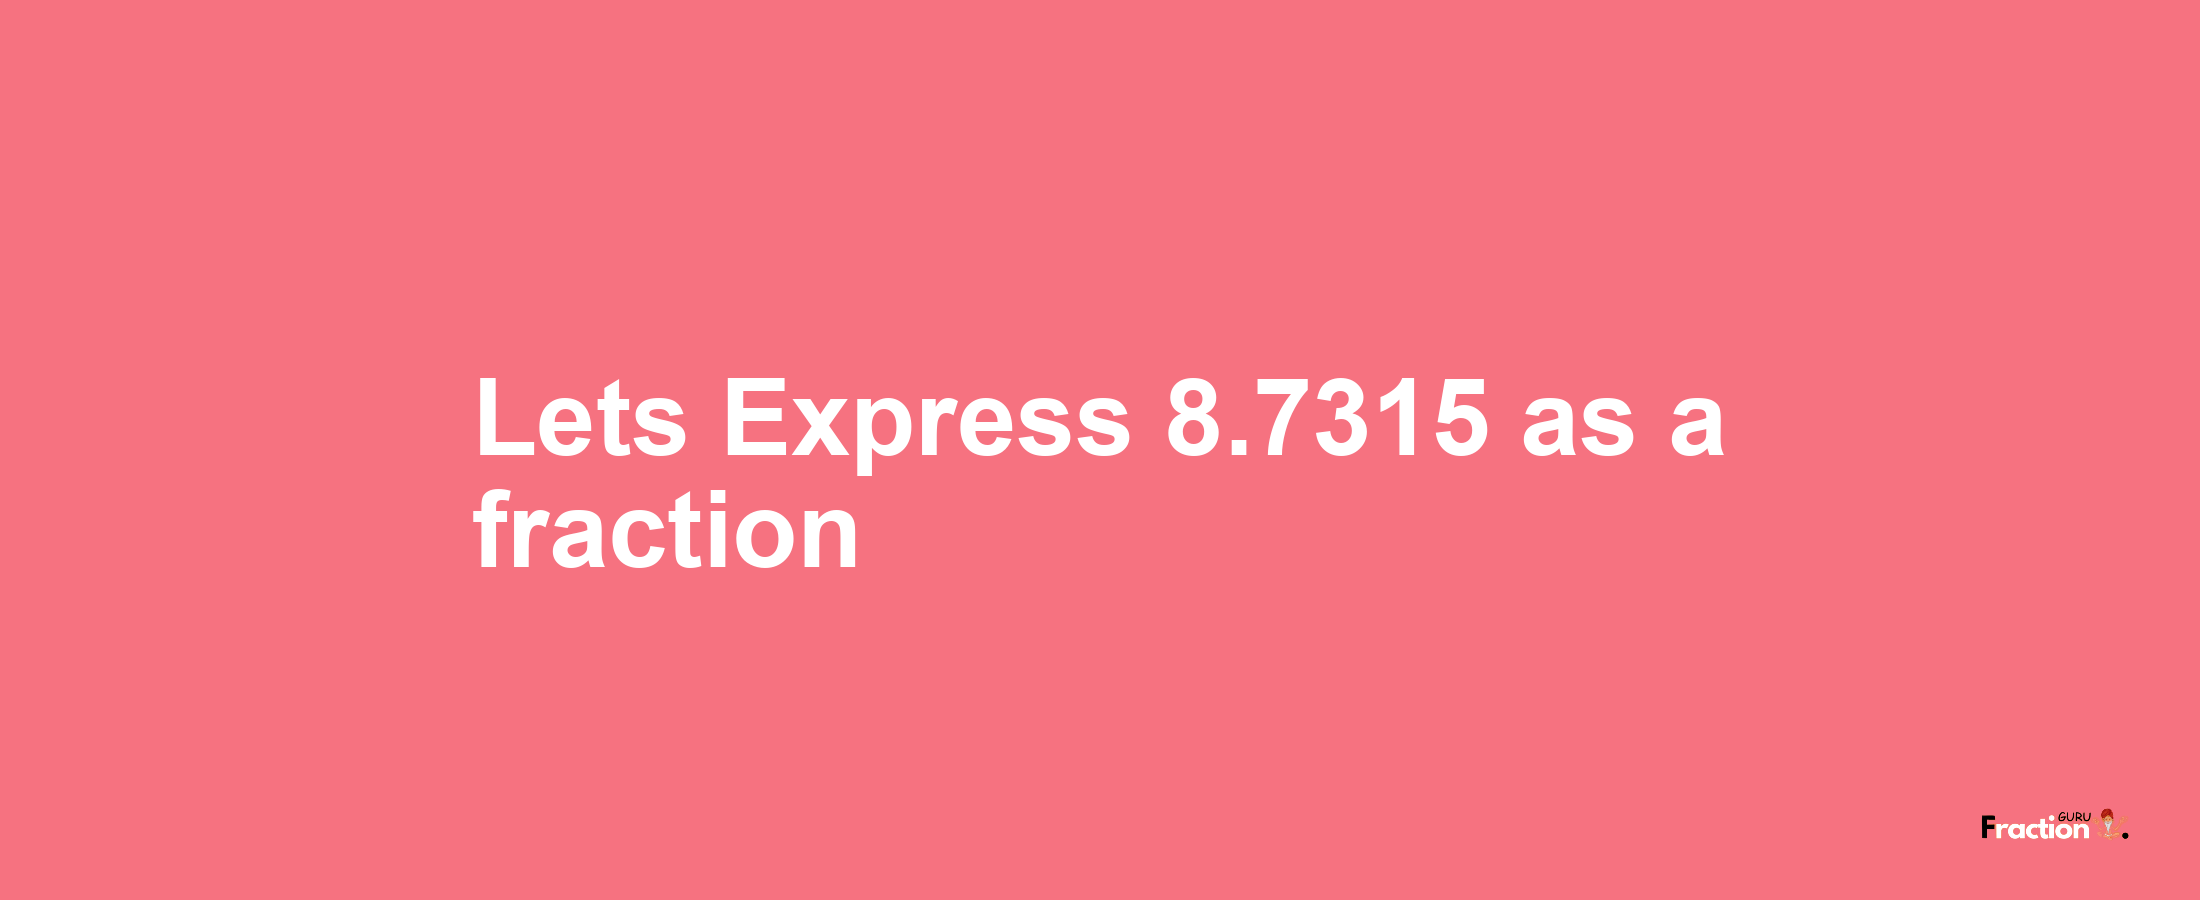 Lets Express 8.7315 as afraction